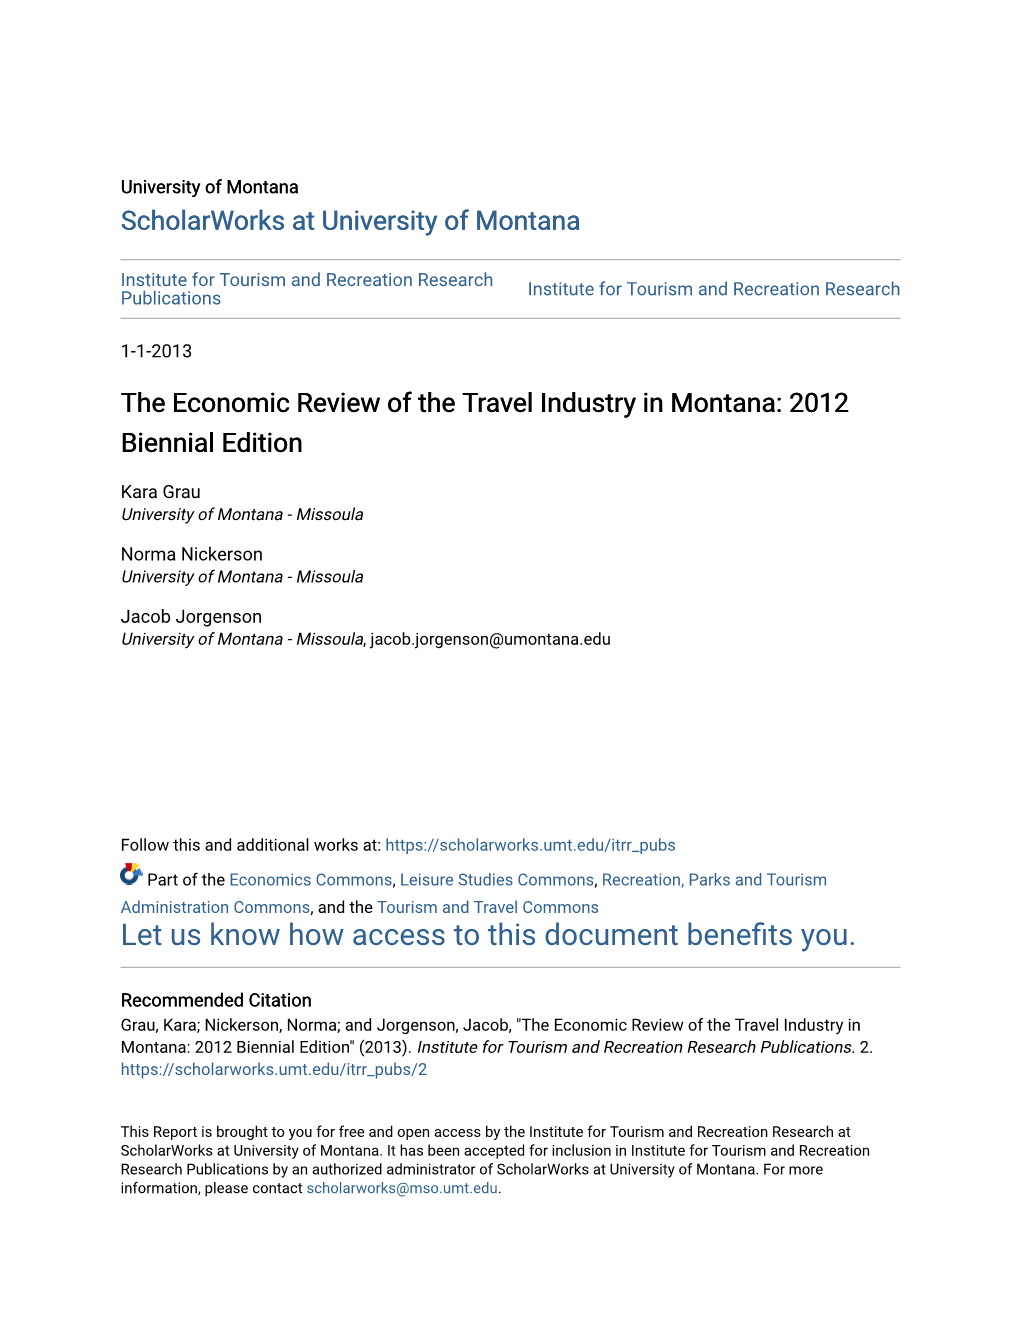 The Economic Review of the Travel Industry in Montana: 2012 Biennial Edition